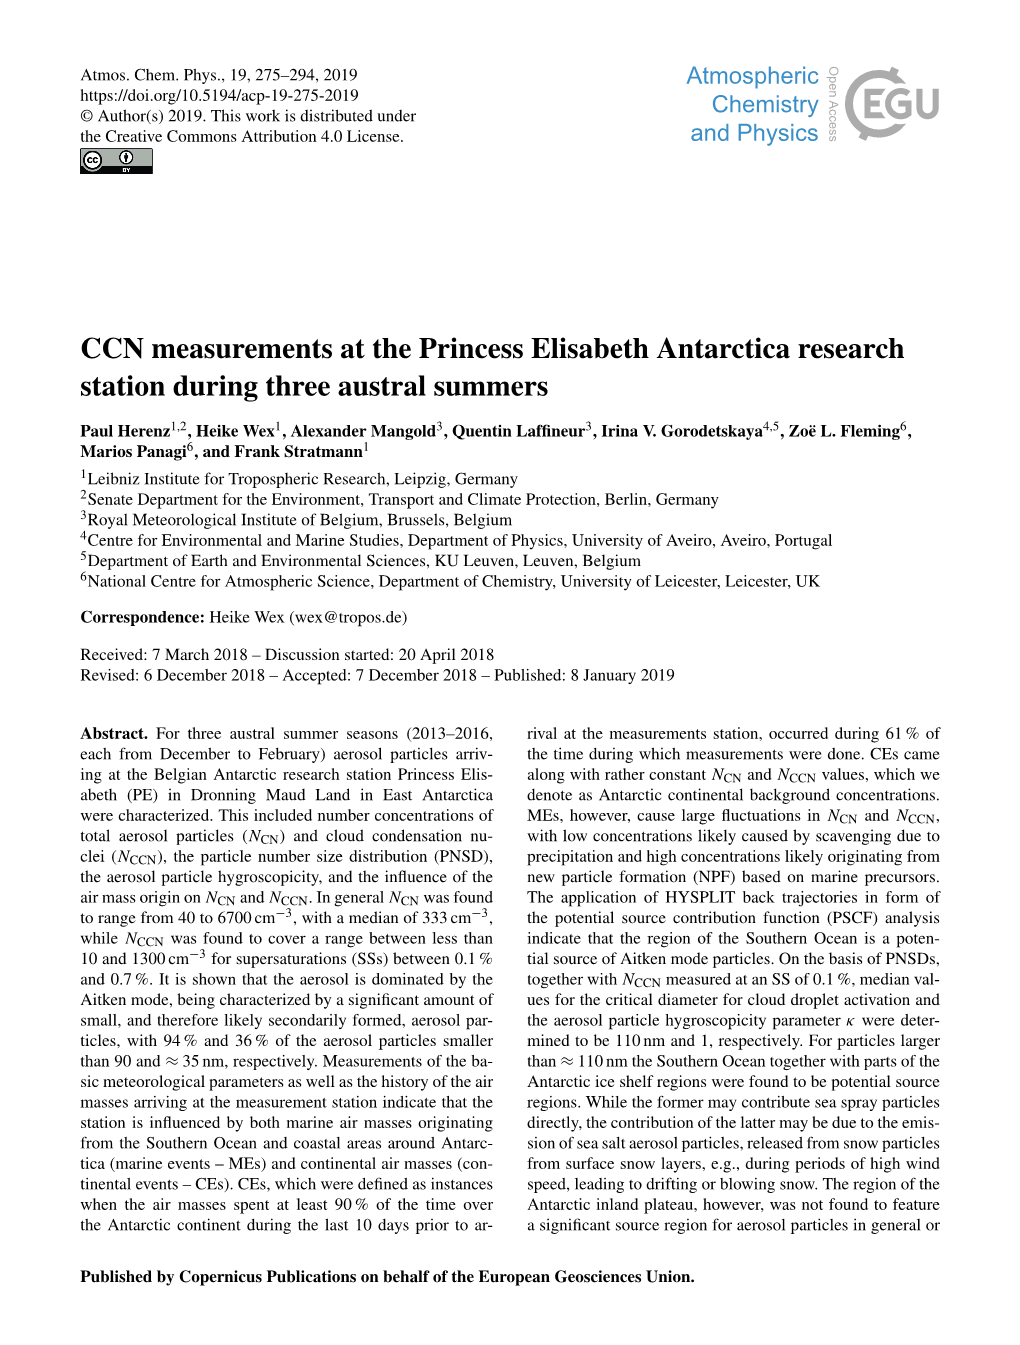 CCN Measurements at the Princess Elisabeth Antarctica Research Station During Three Austral Summers